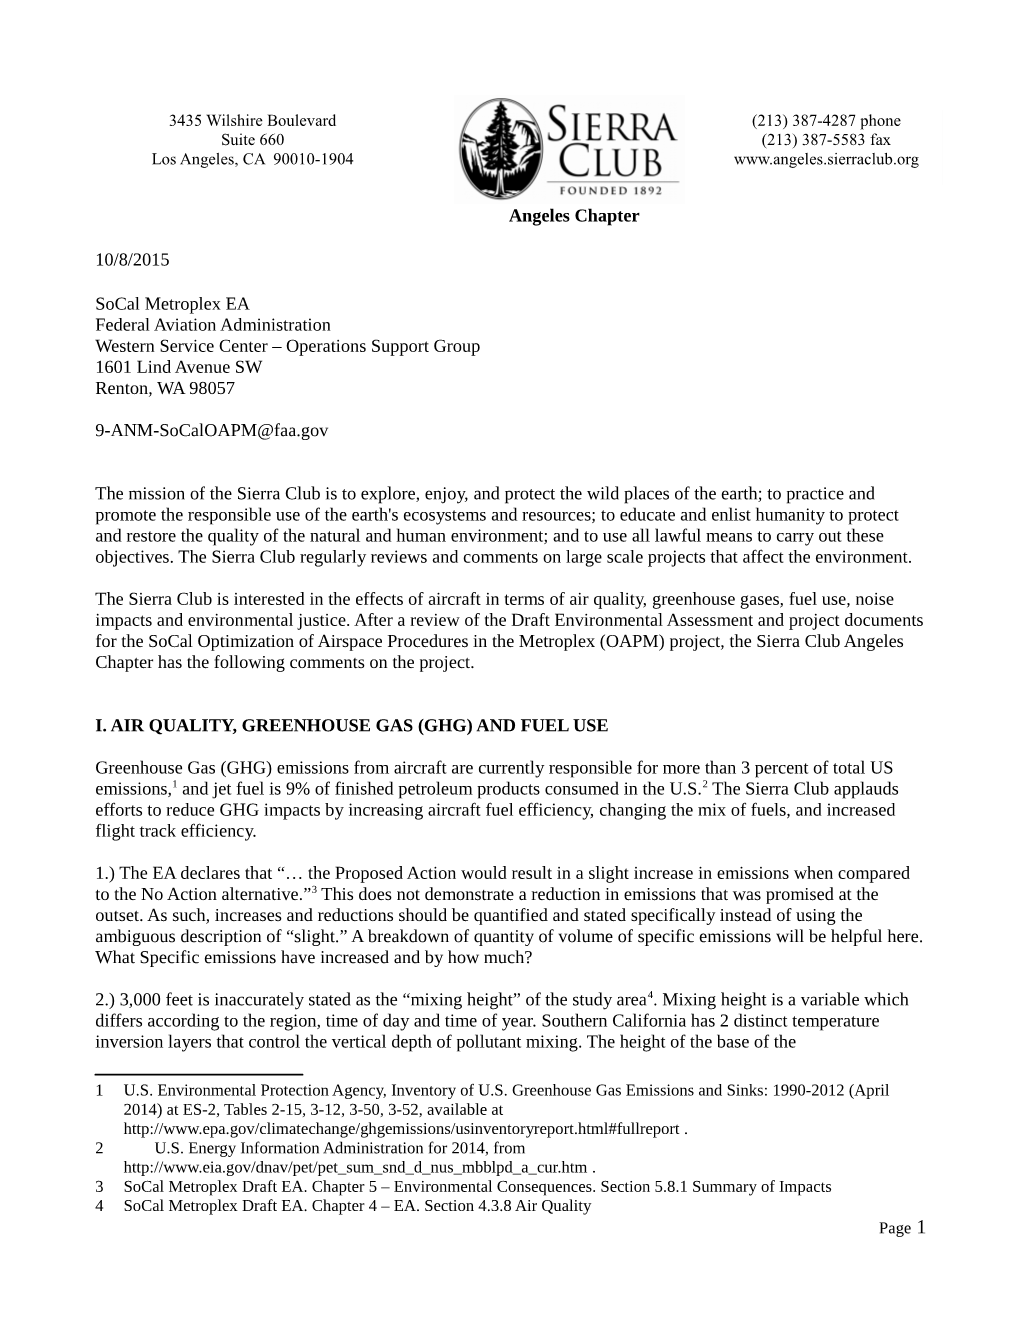 Sierra Club Comments to the FAA Socal Metroplex